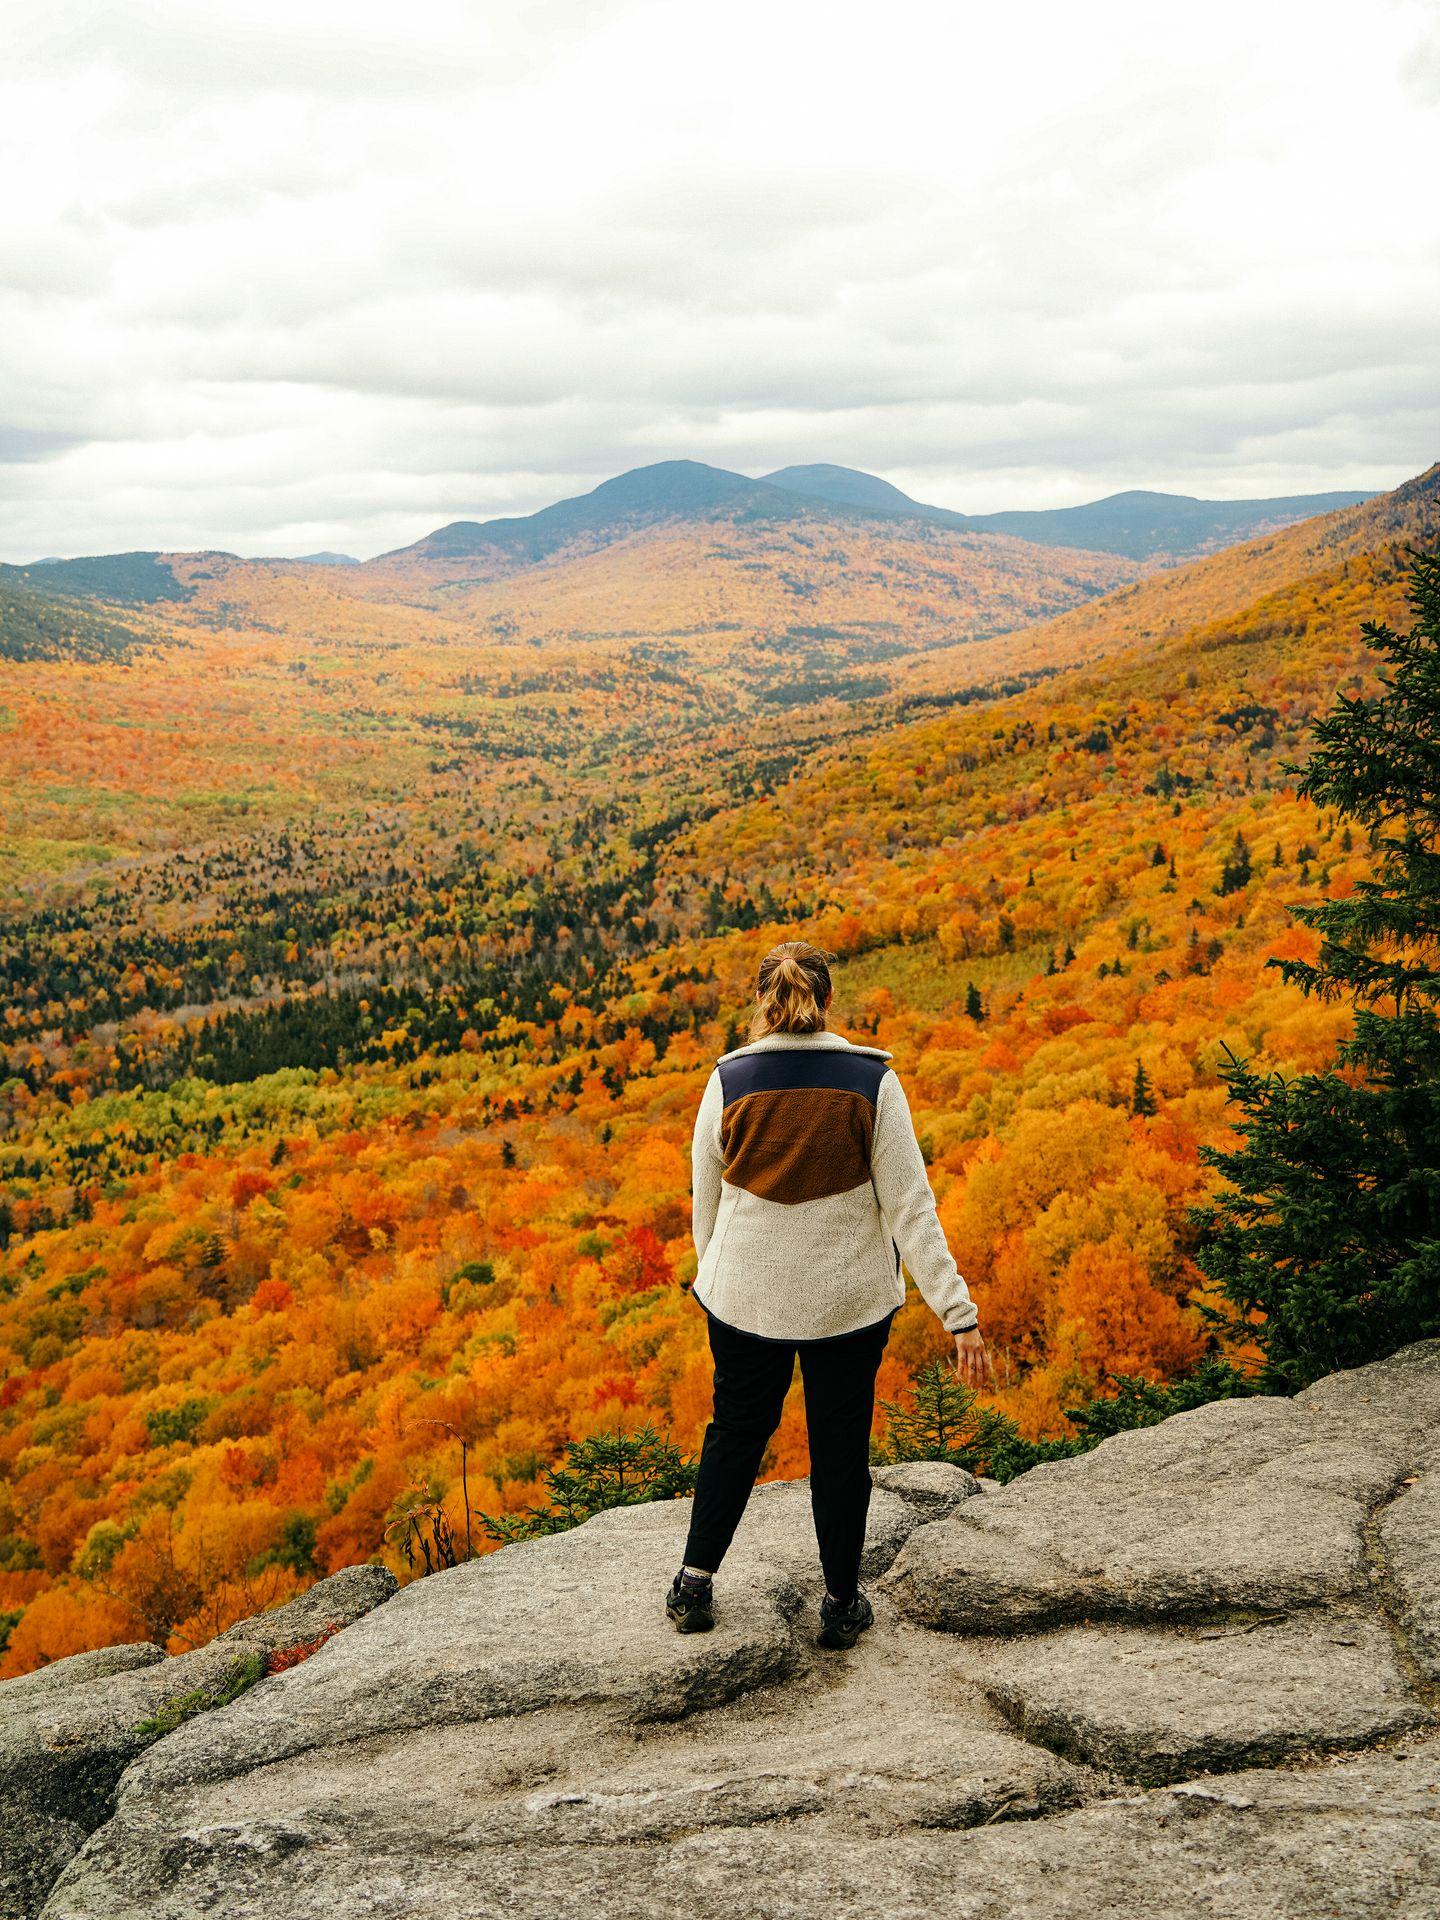 Lydia standing on a cliff and looking out a view of bright orange leaves.